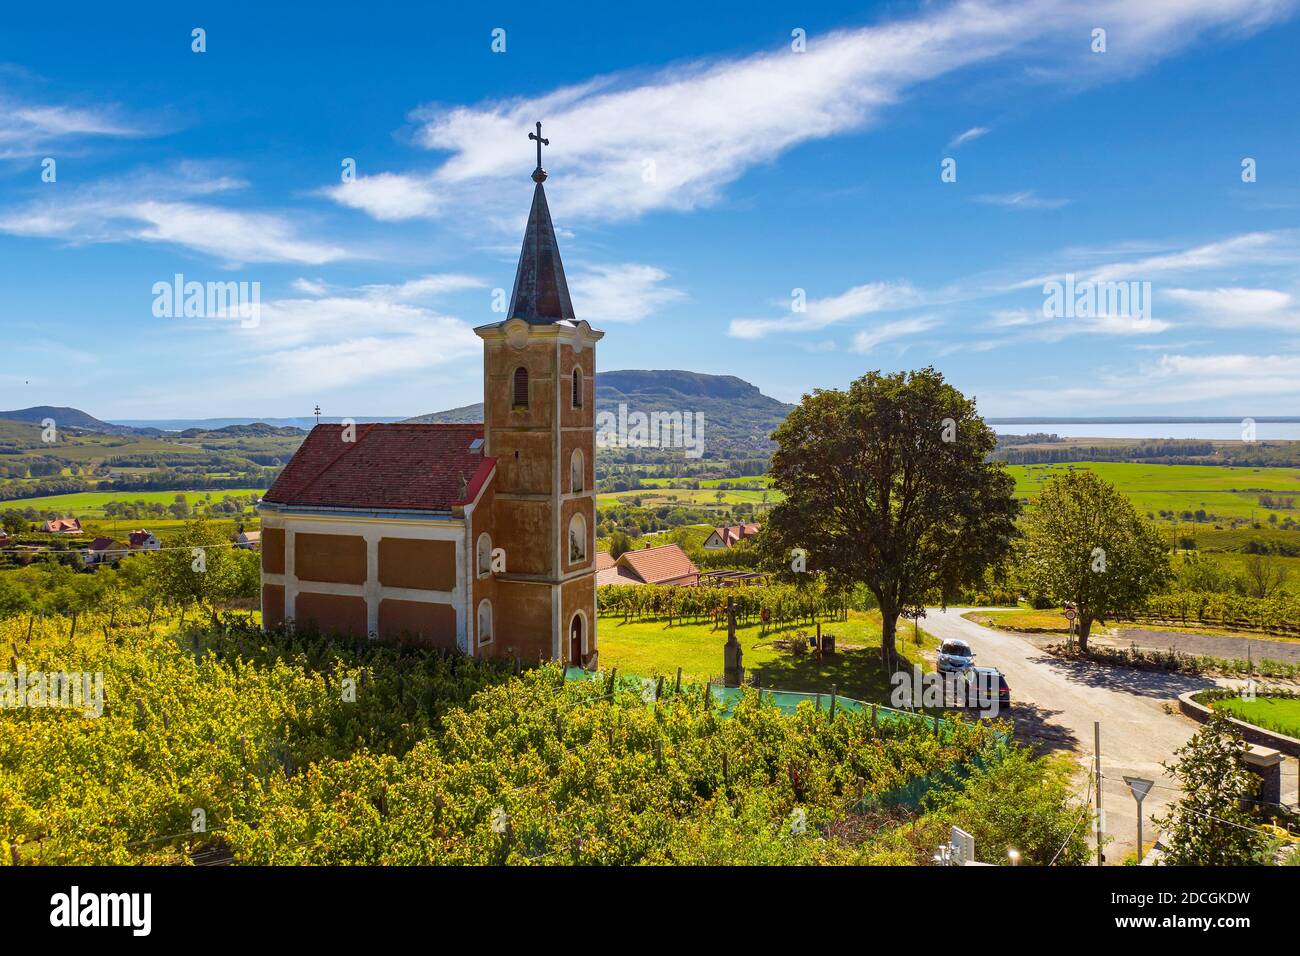 Lengyel cahpel in Hungary next to Hegymagas town Near by Lake Balaton. Hungarian name is Lengyel kápolna. This place there is on  Badacson wine region Stock Photo